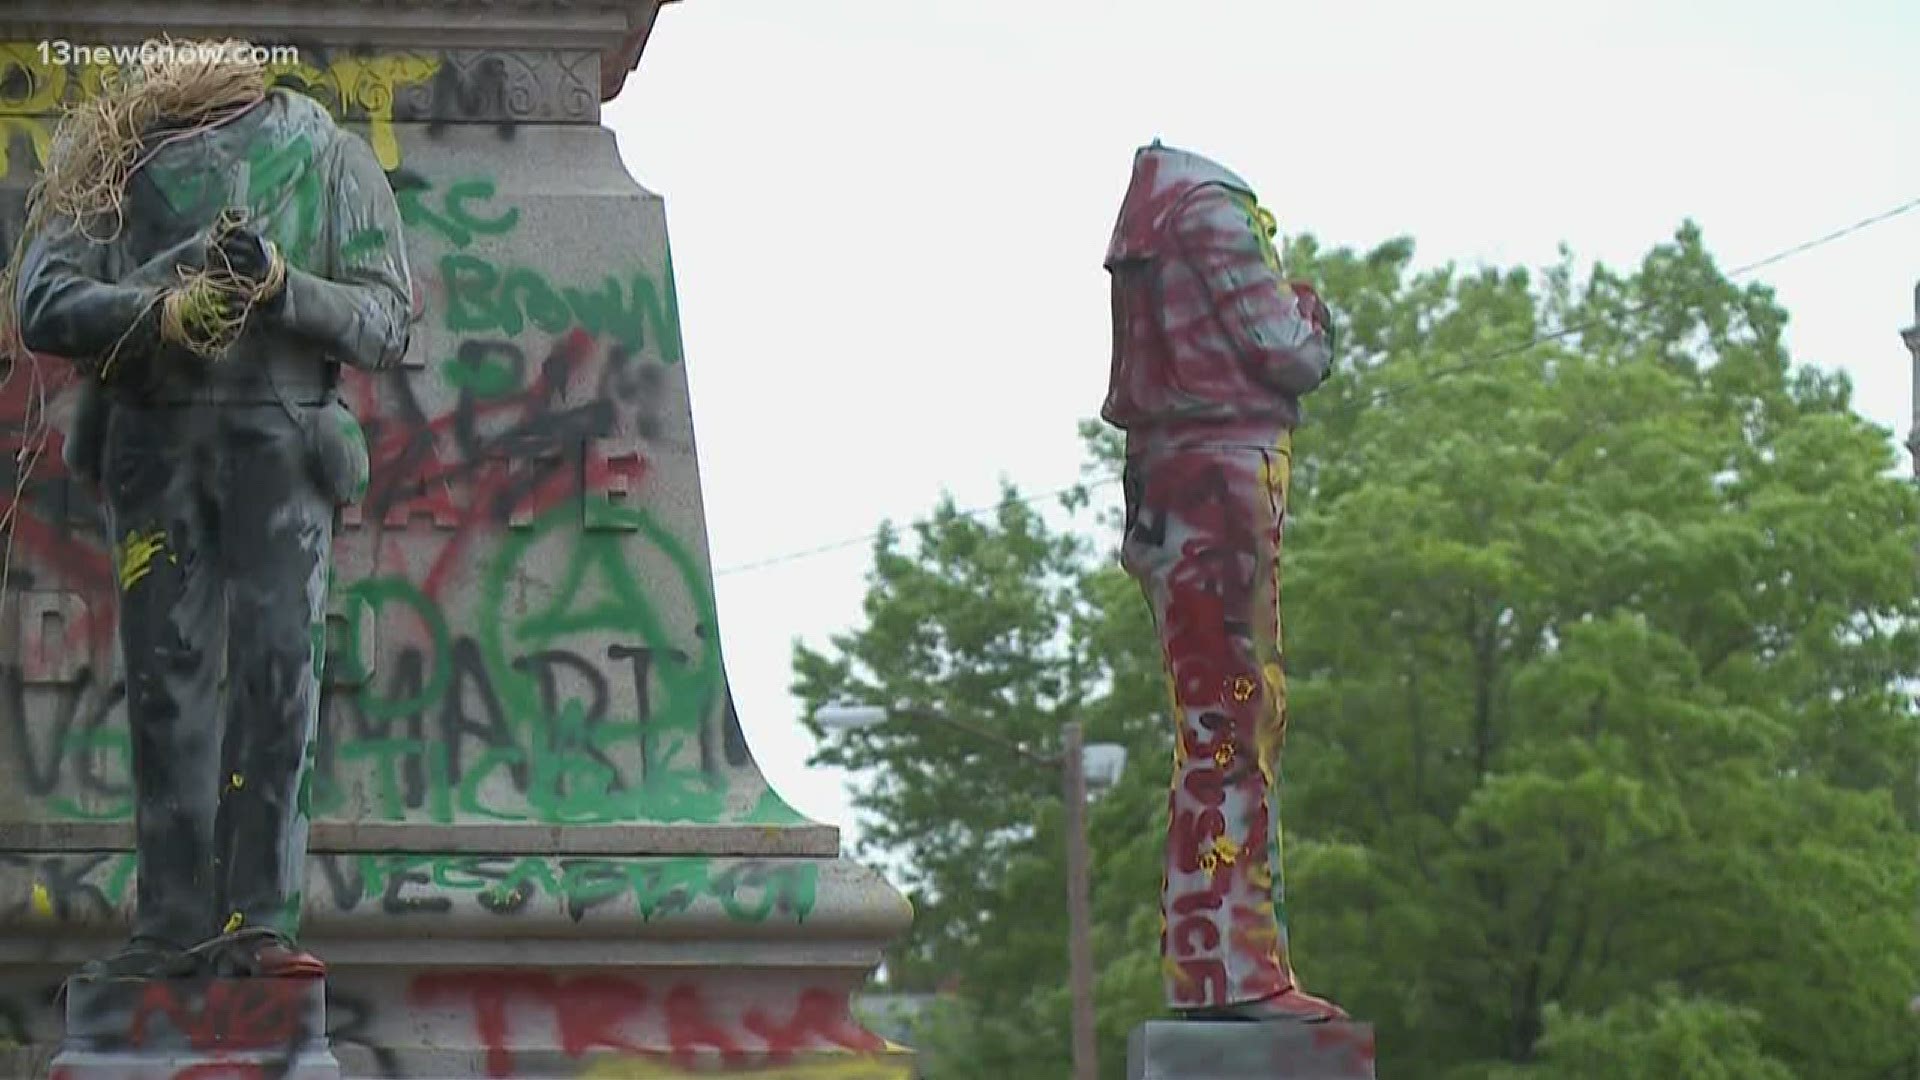 13News Now Madison Kimbro has reactions from people who came to see the defaced Confederate monument in Portsmouth that protesters tore down parts of.